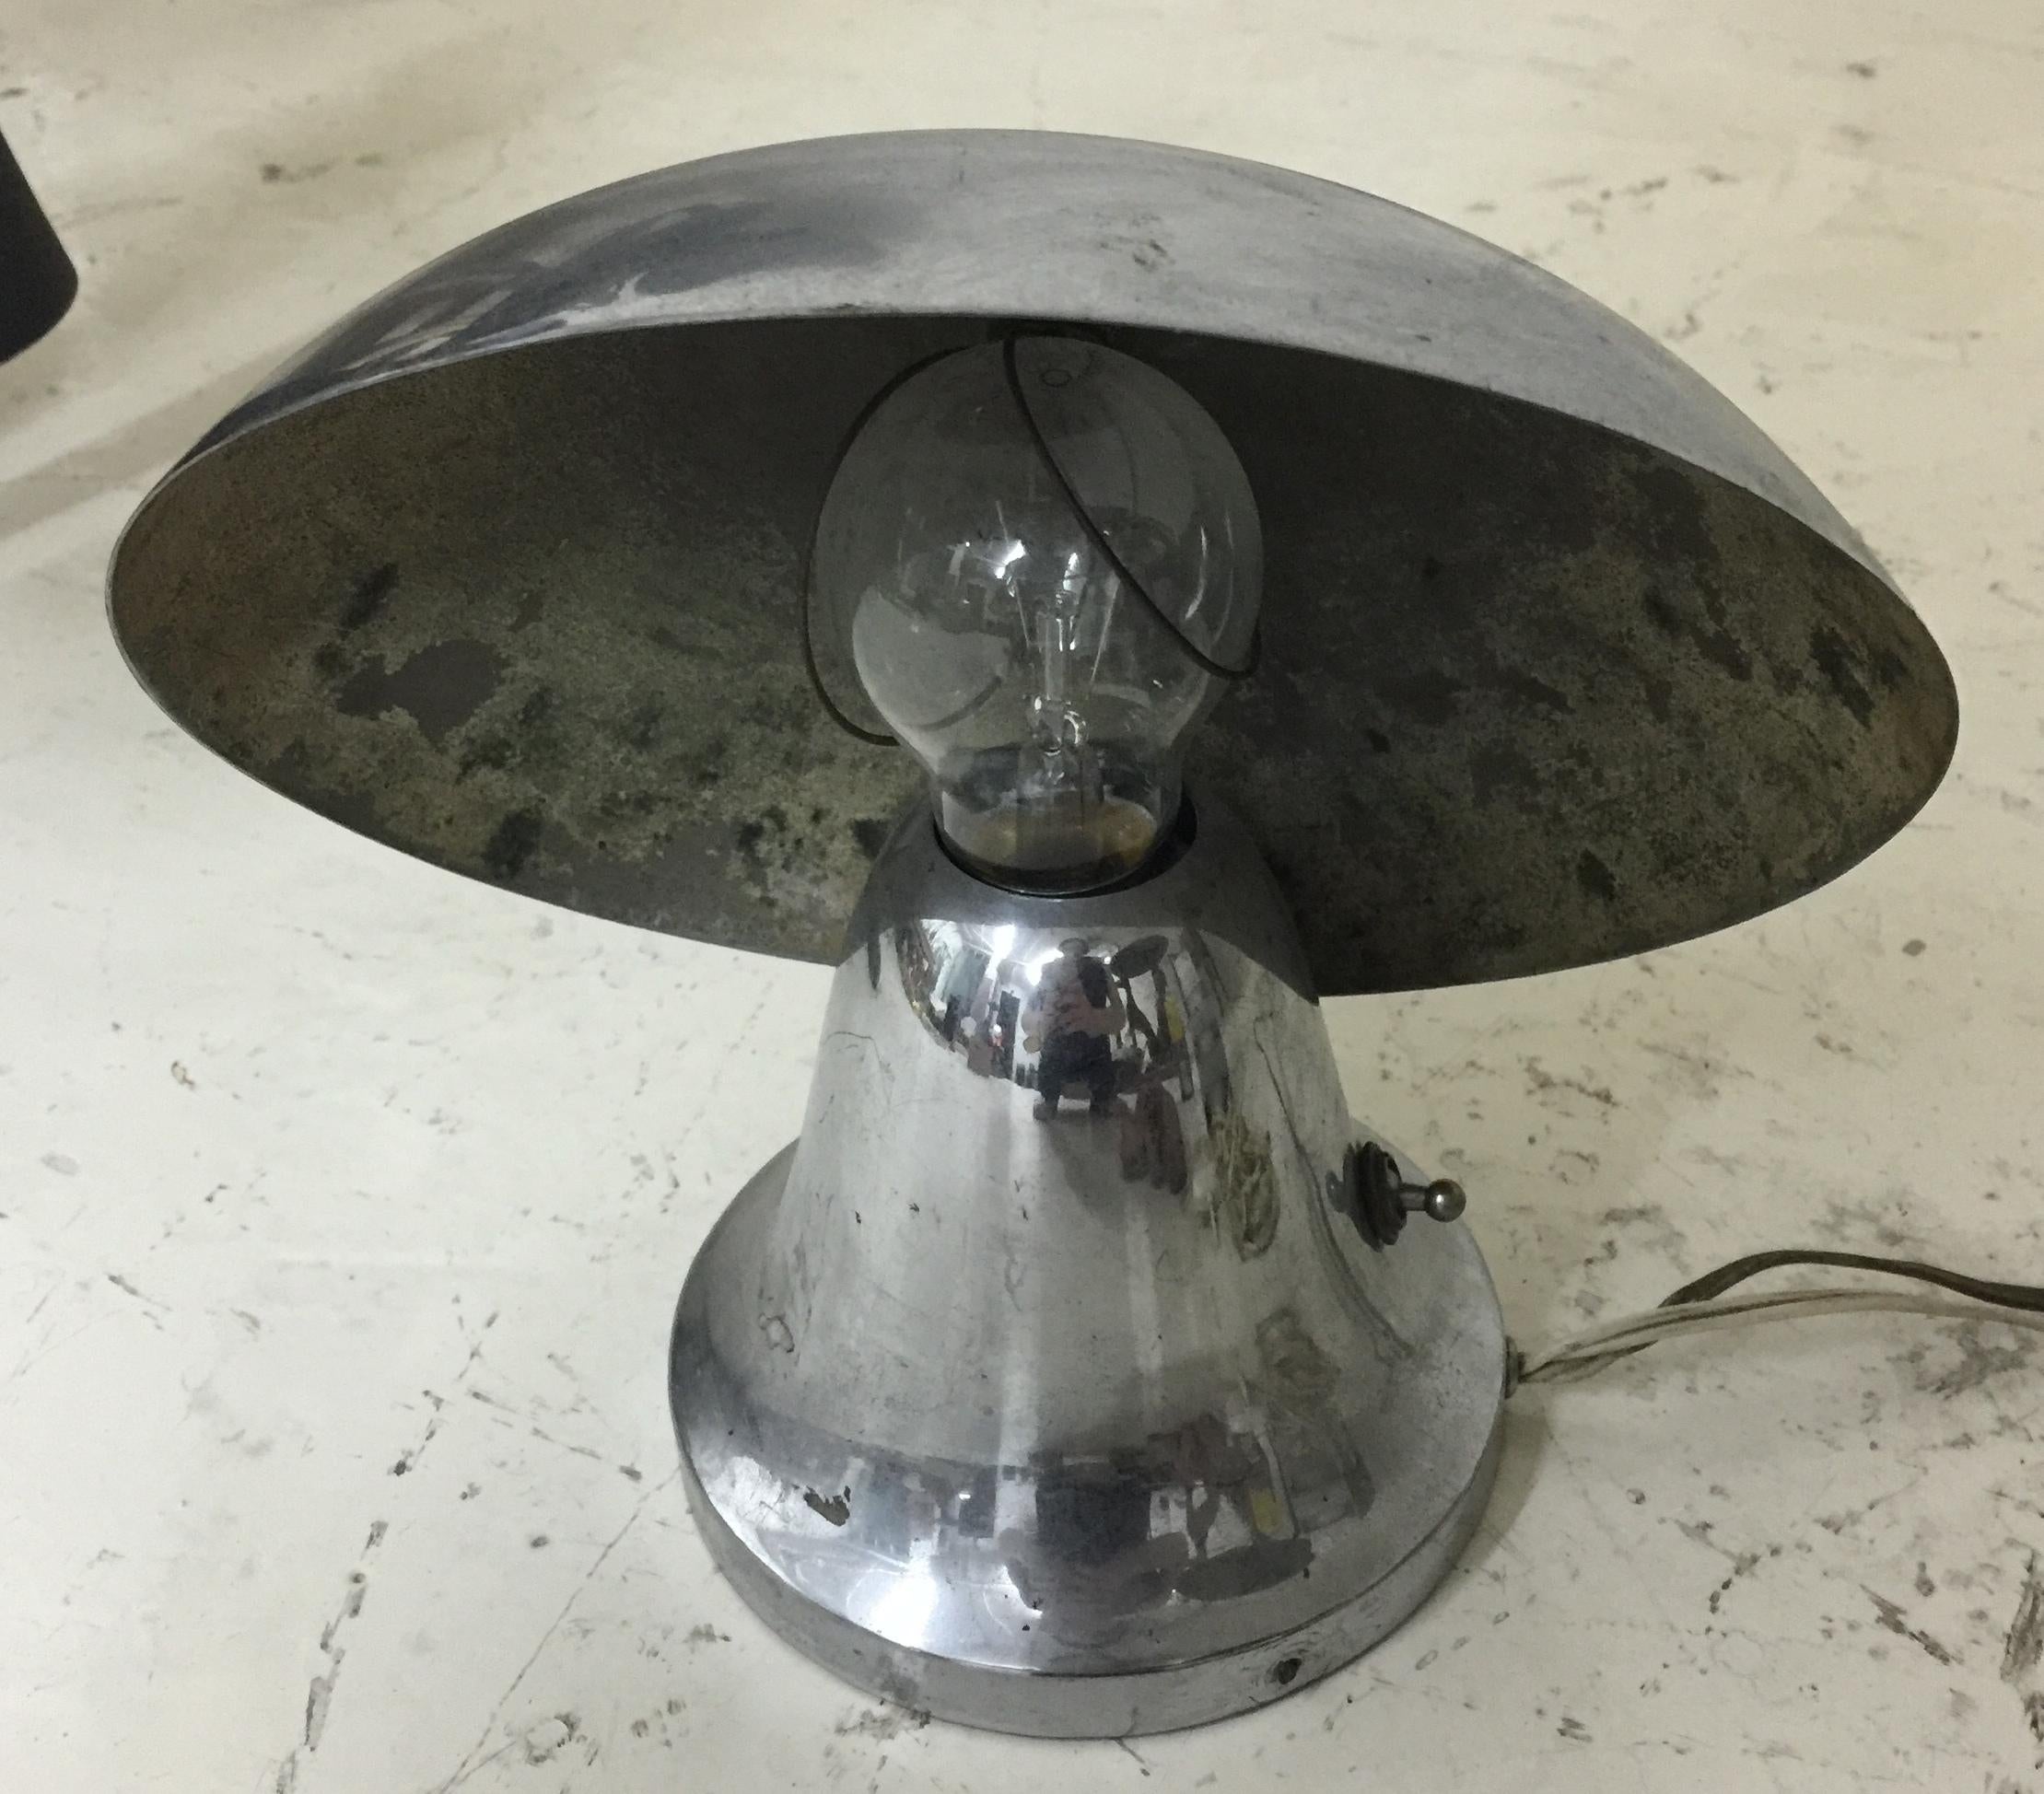 Table Lamp Art deco

Materia: chrome
Style: Art Deco
Country: France
To take care of your property and the lives of our customers, the new wiring has been done.
If you want to live in the golden years, this is the table lamp that your project